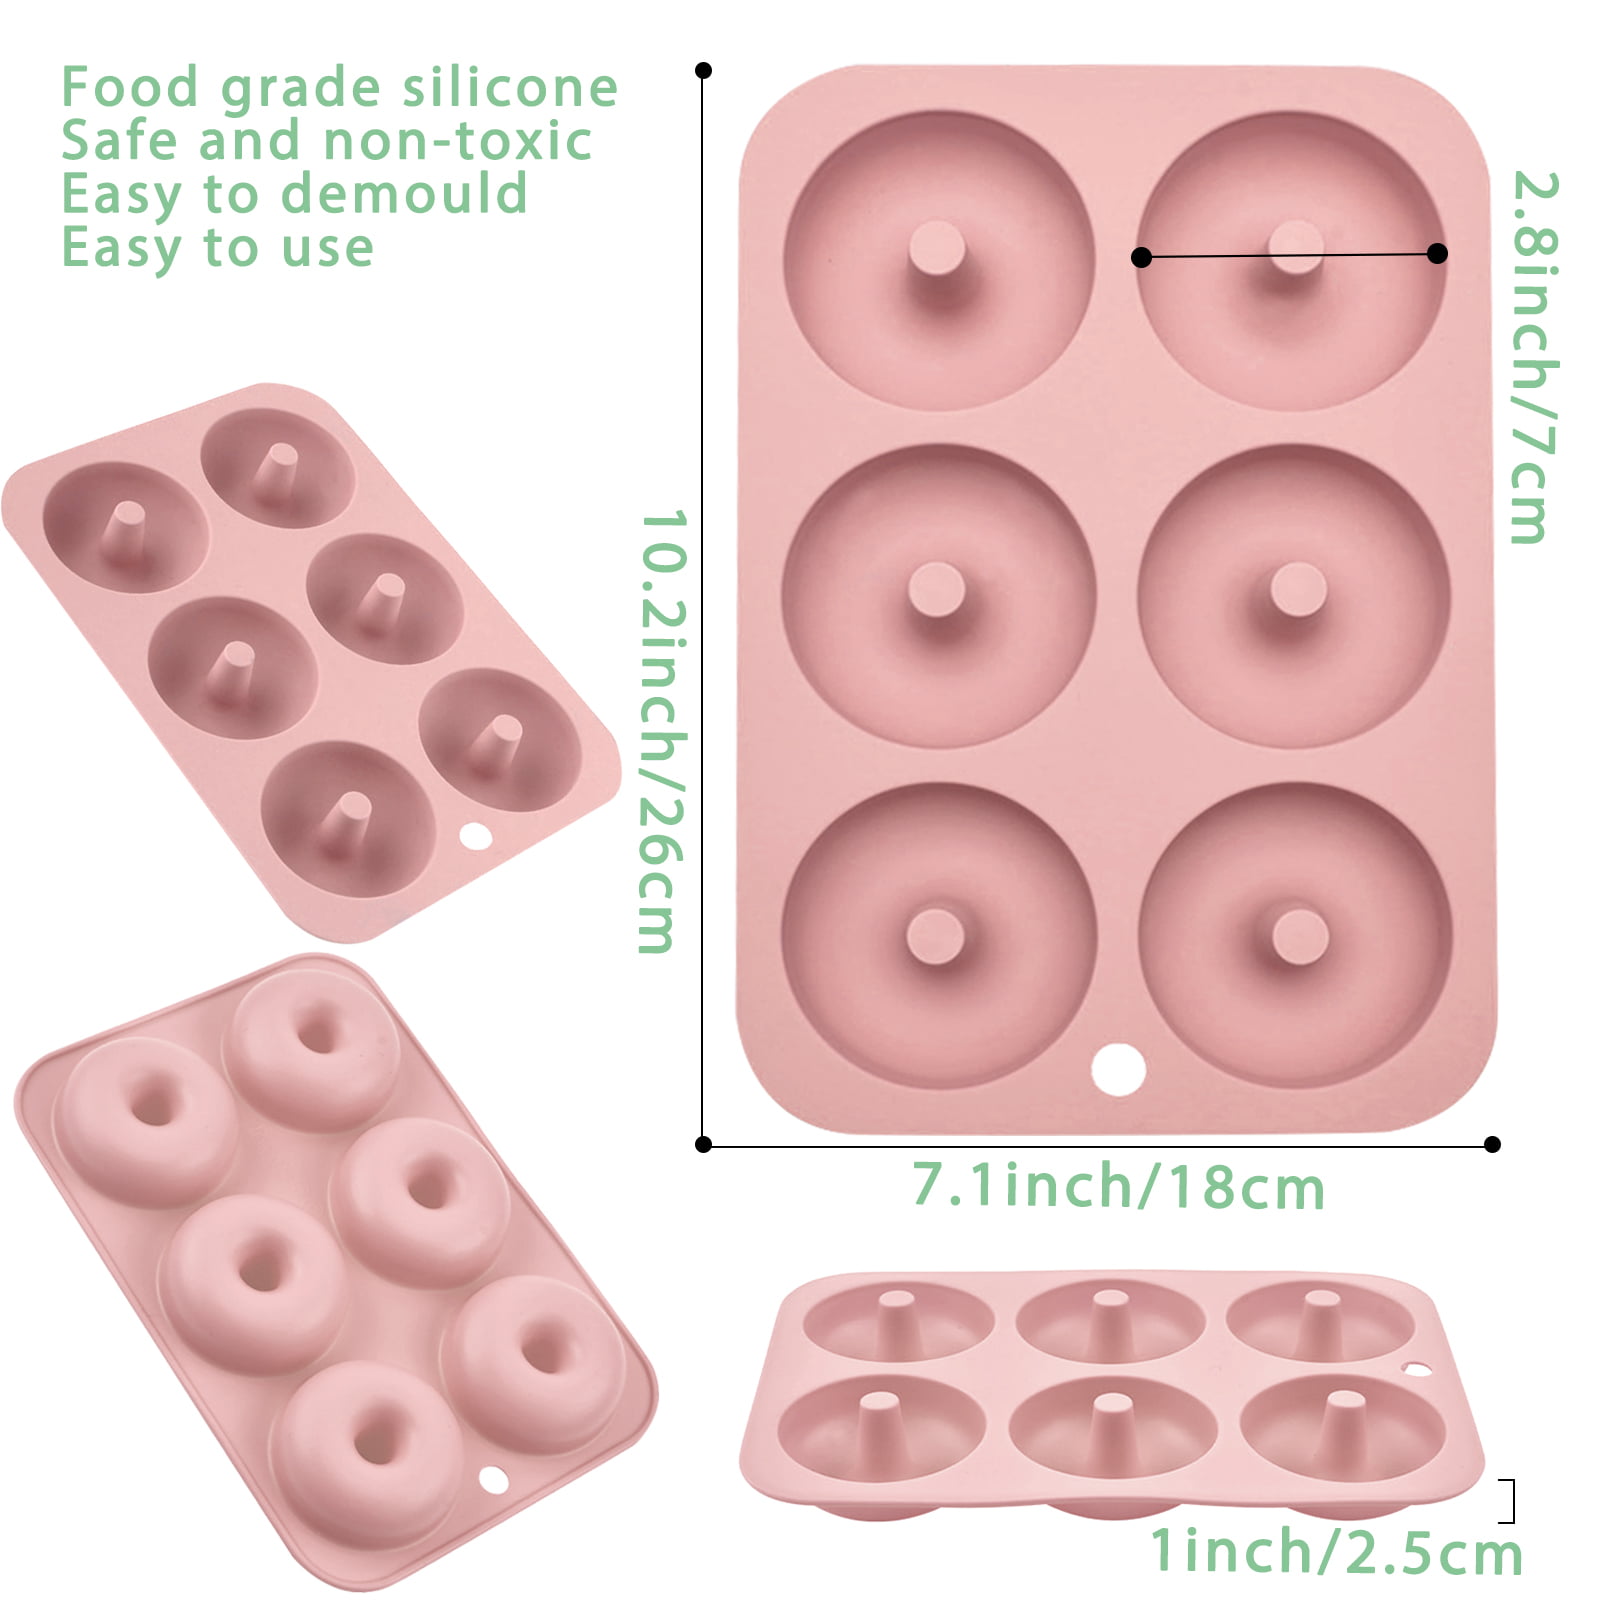 Aichoof Silicone Donut Mold for 6 Doughnuts, Set of 2. Food Grade LFGB  Silicone Bagels Baking Pan, Non-Stick, Dishwasher Safe, Heat Resistant and